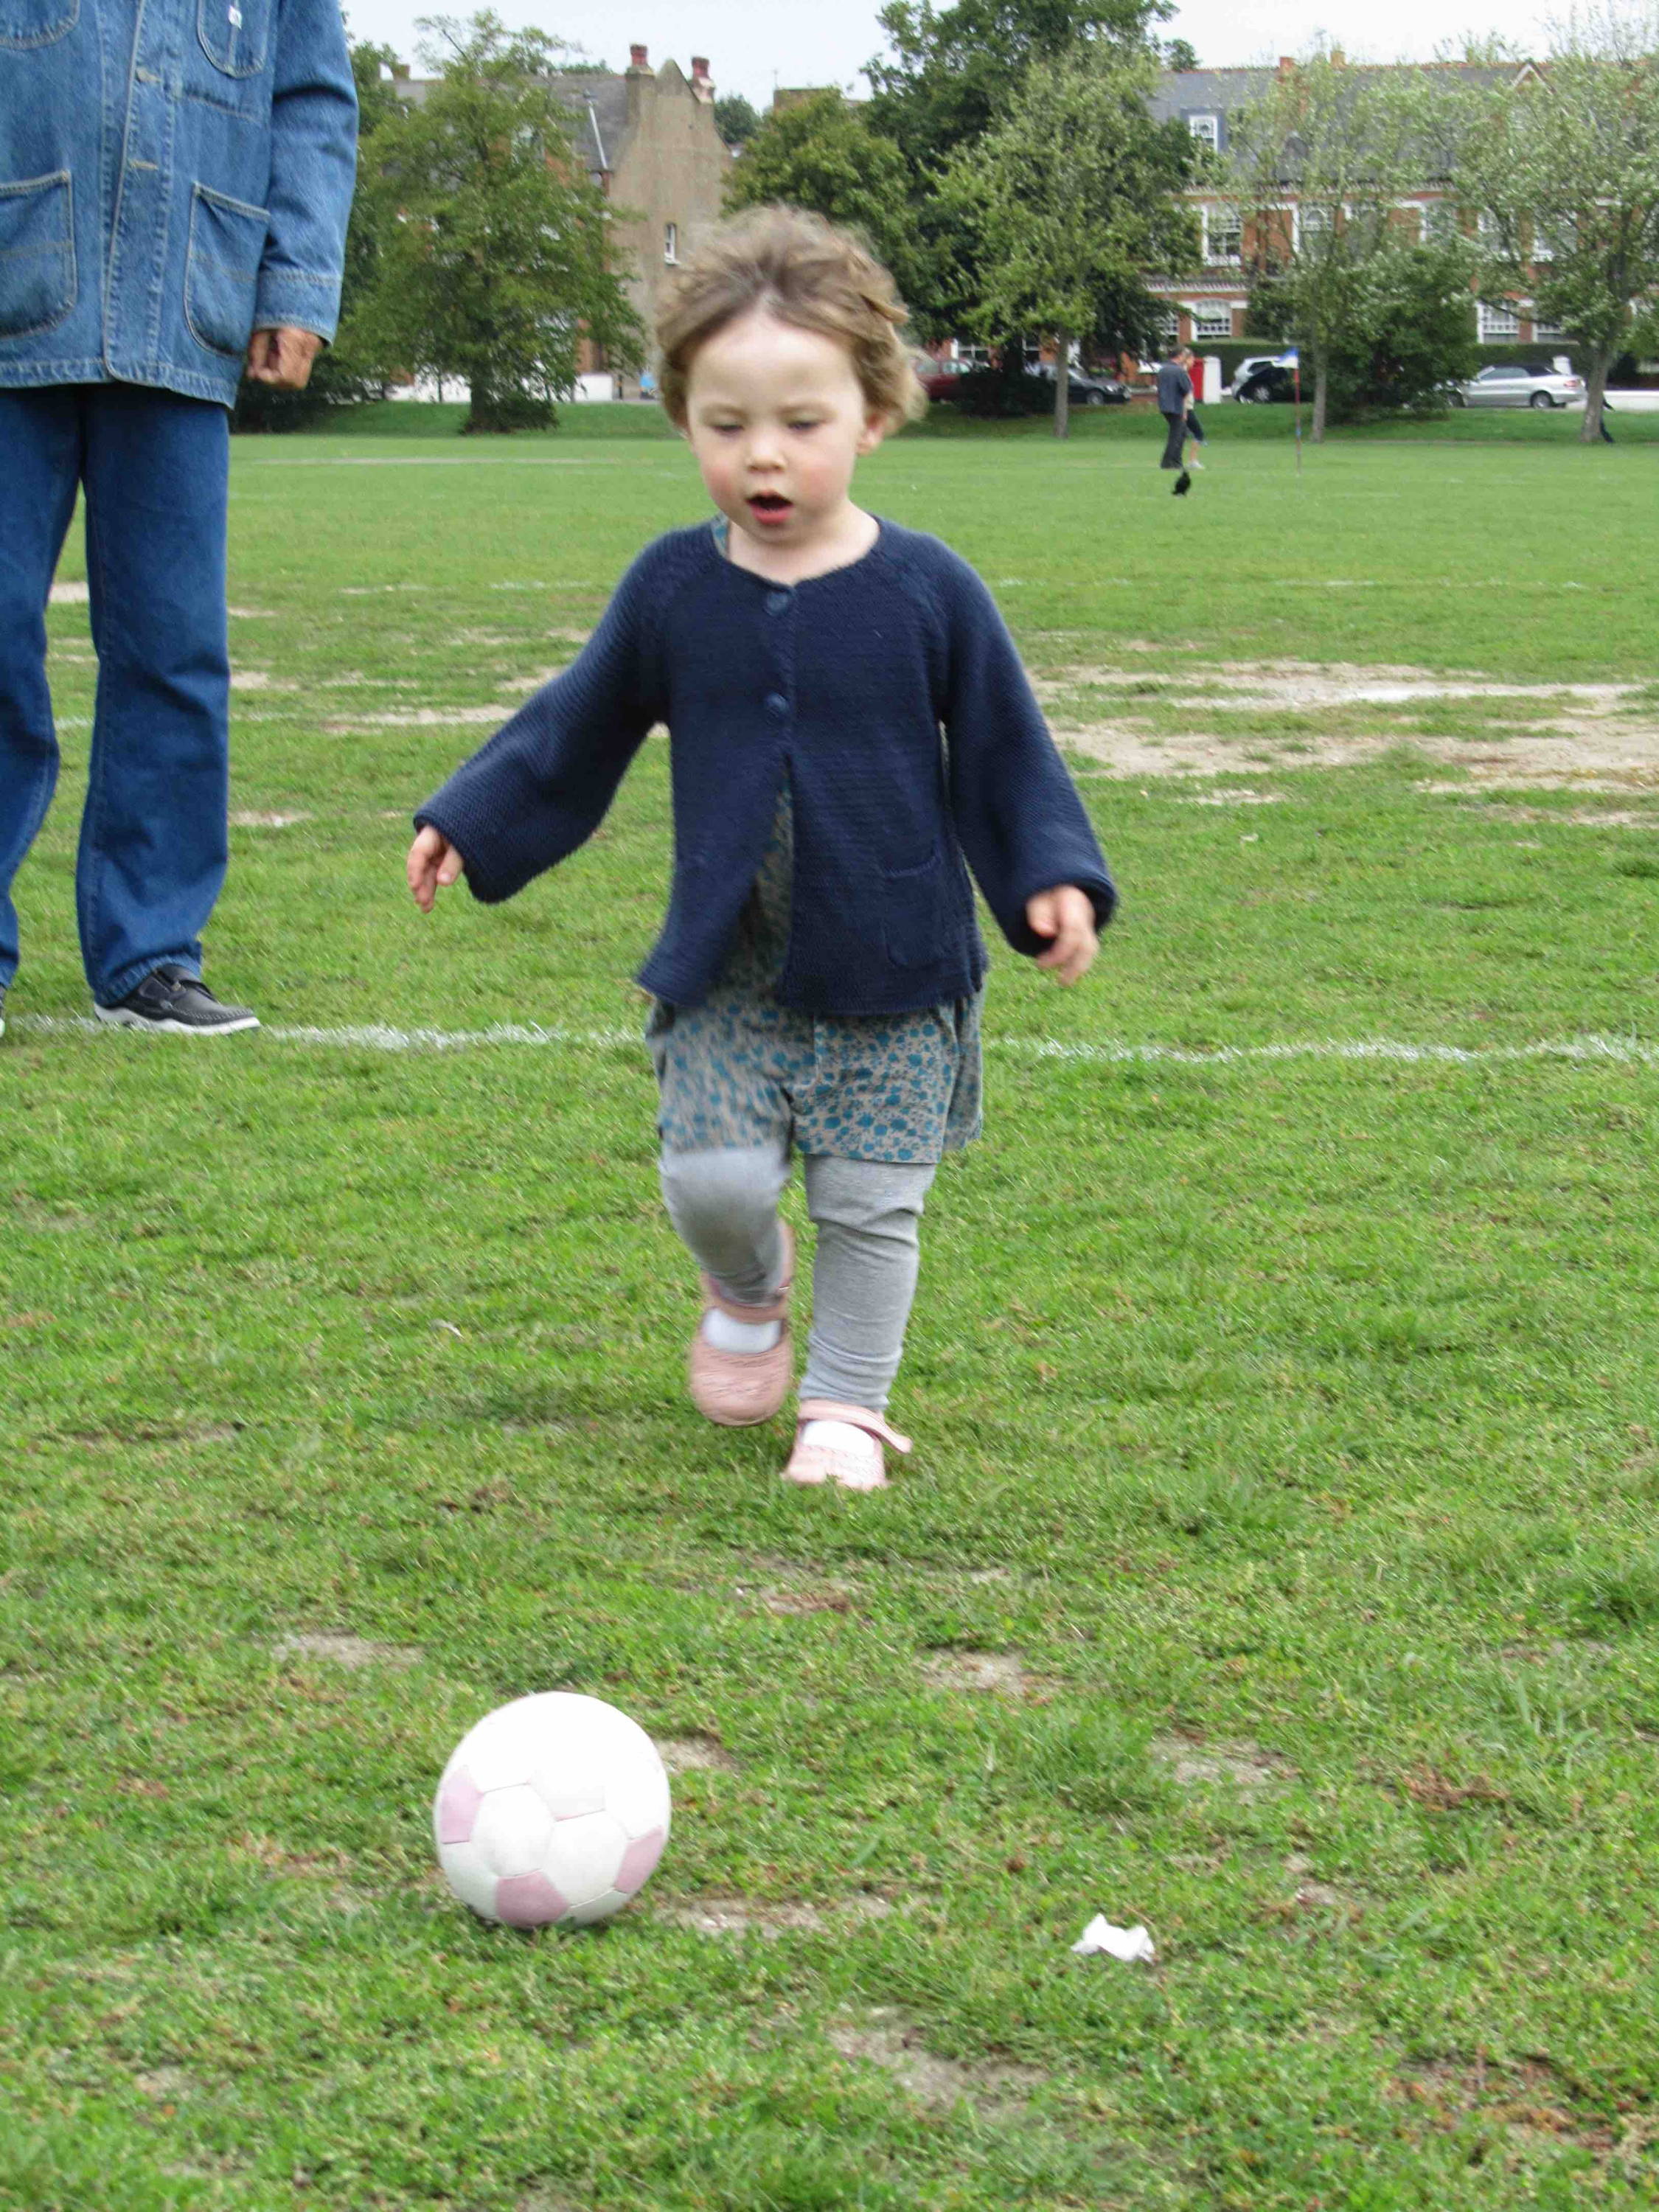 Emma's daughter playing football